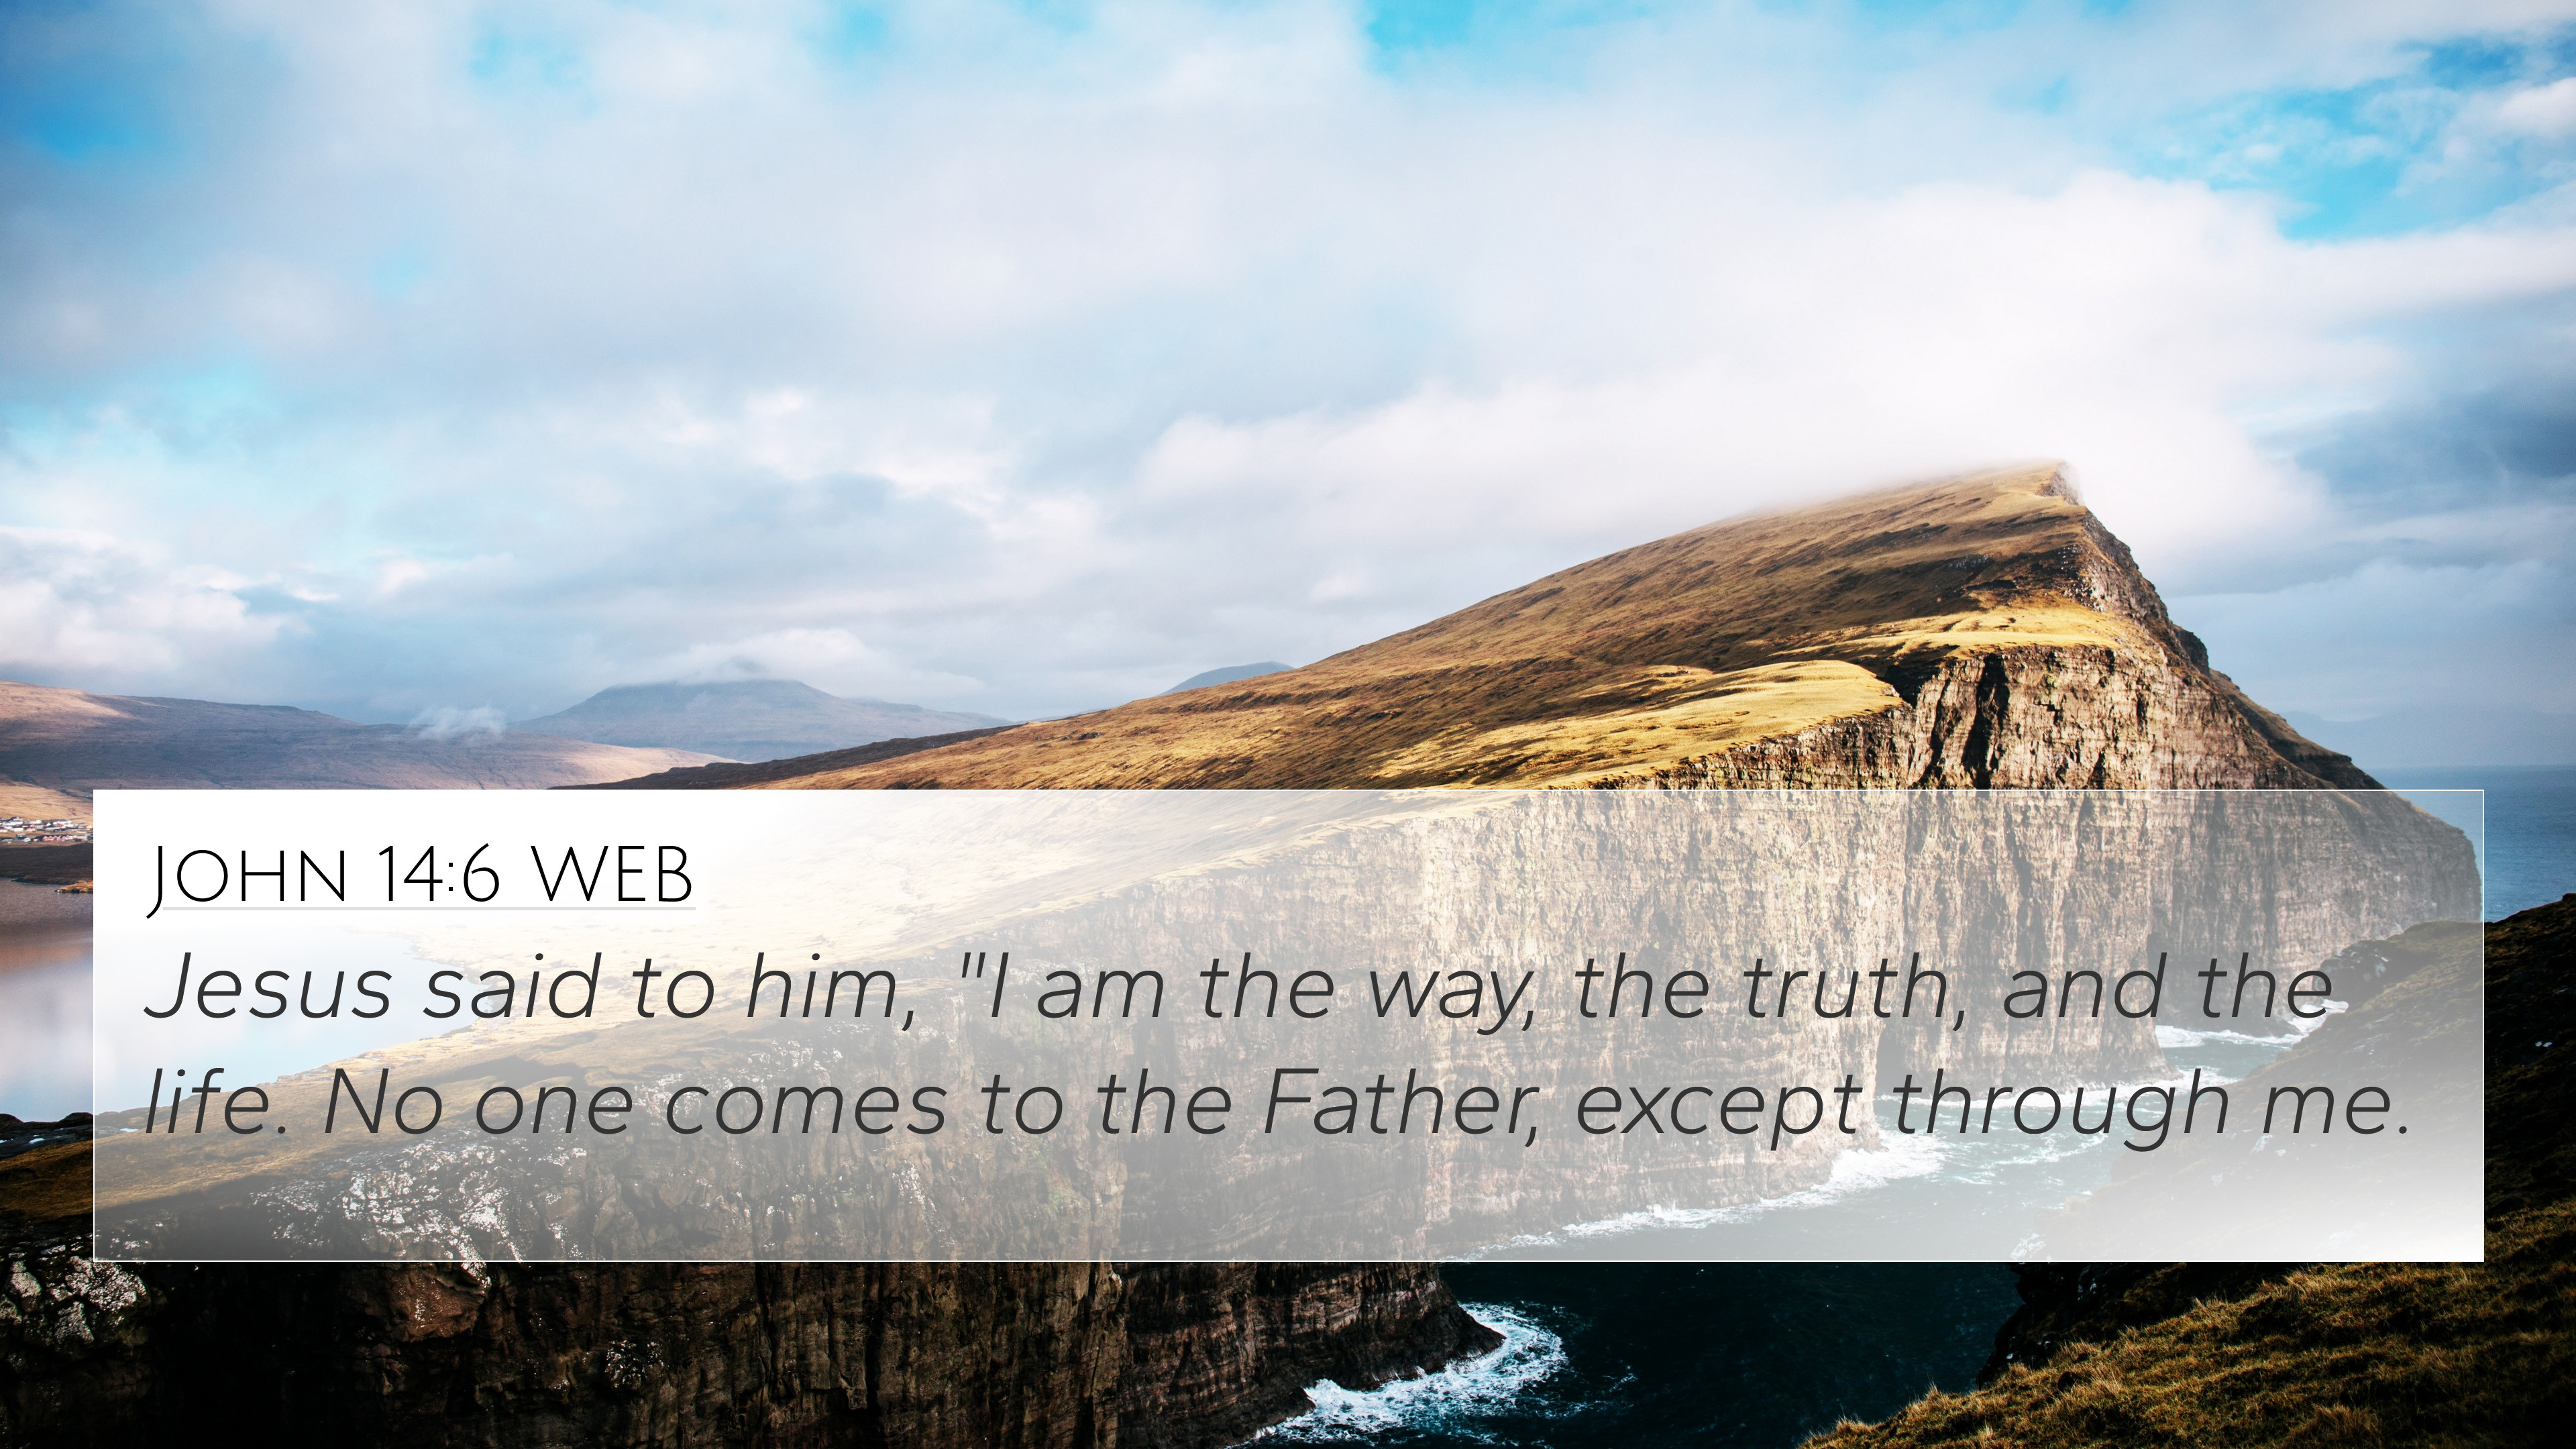 John 14:6 WEB 4K Wallpaper said to him, I am the way, the truth, and